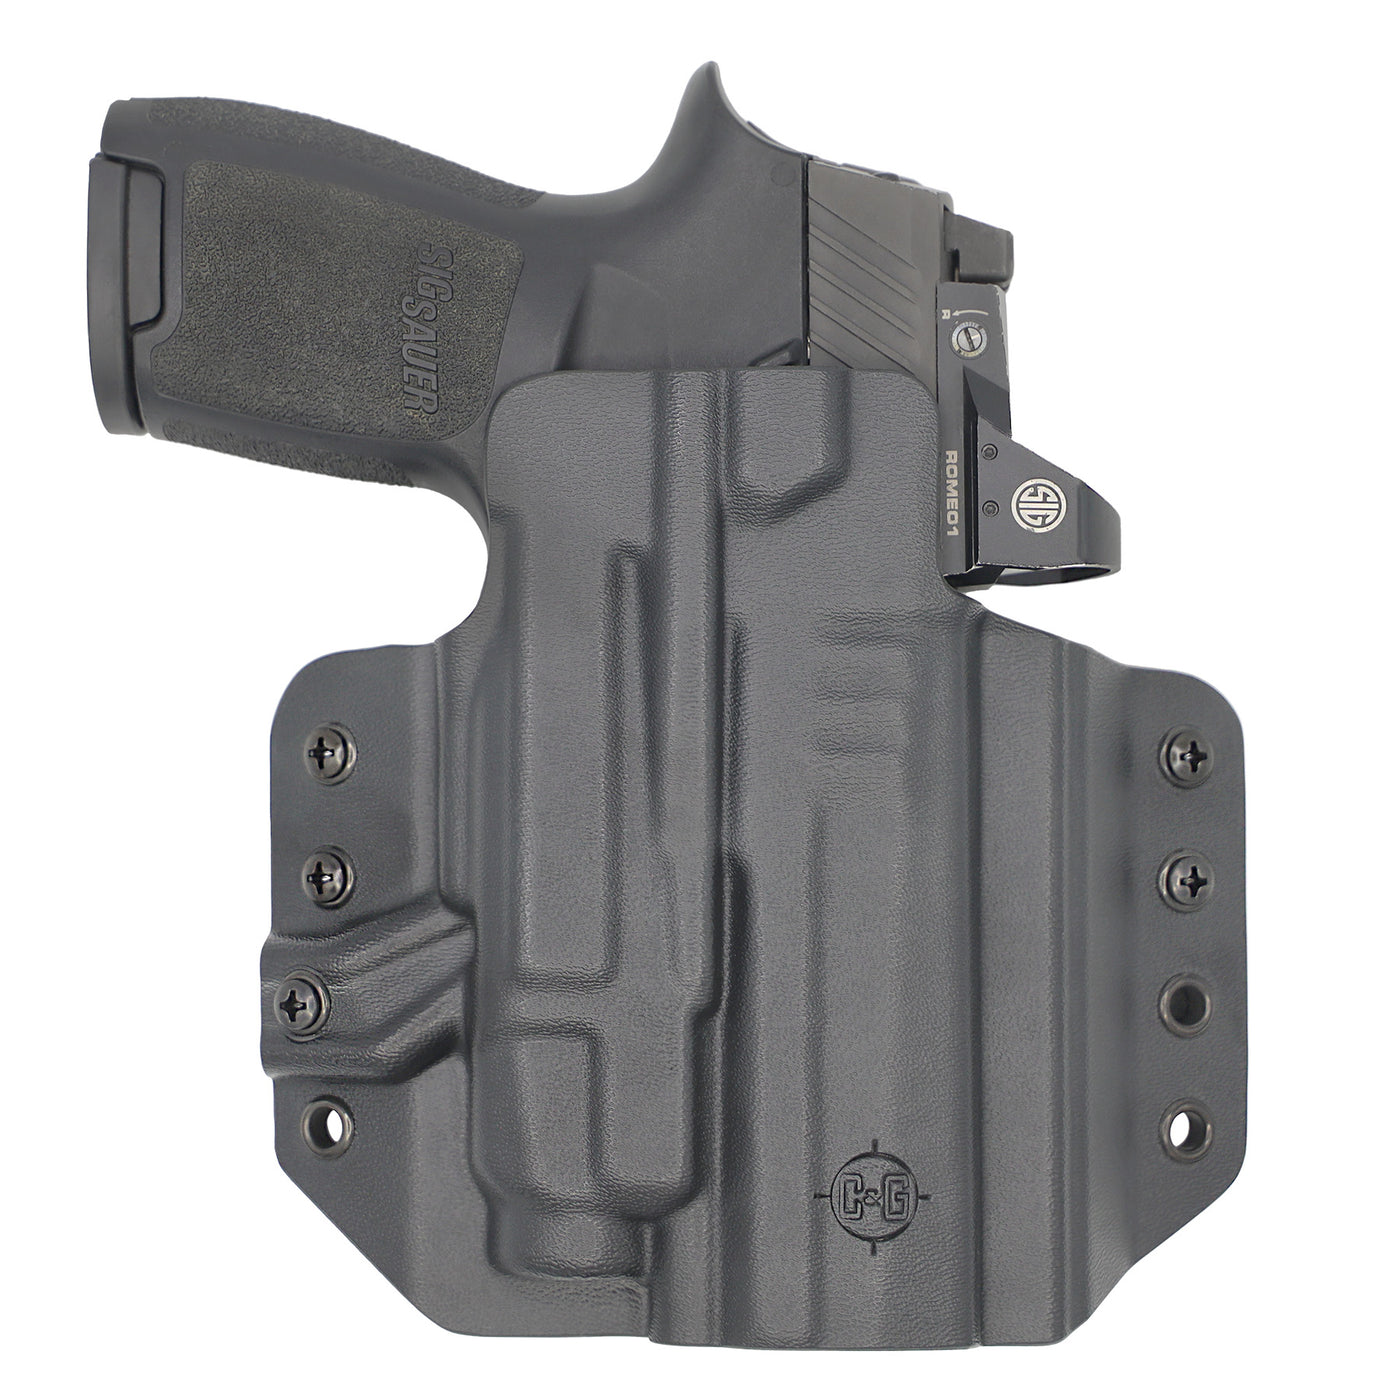 C&G Holsters quickship OWB Tactical Masada Streamlight tlr7/a in holstered position